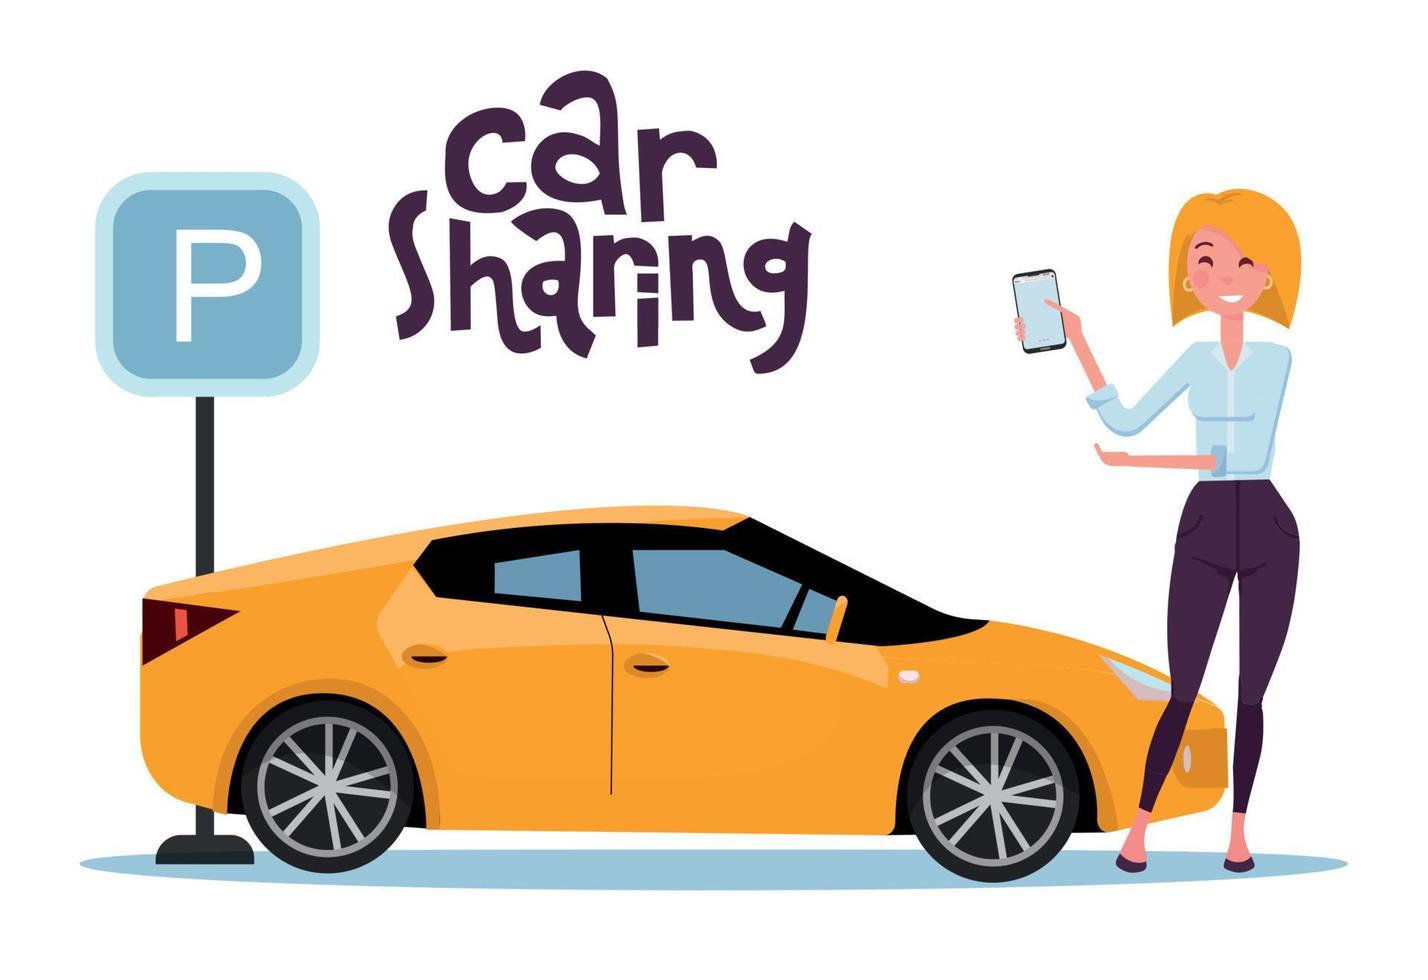 Attractive blond young woman holding mobile phone rents a car in the parking lot online. New yellow car stands at the parking sign. Carsharing concent. Vector flat cartoon illustration with lettering.